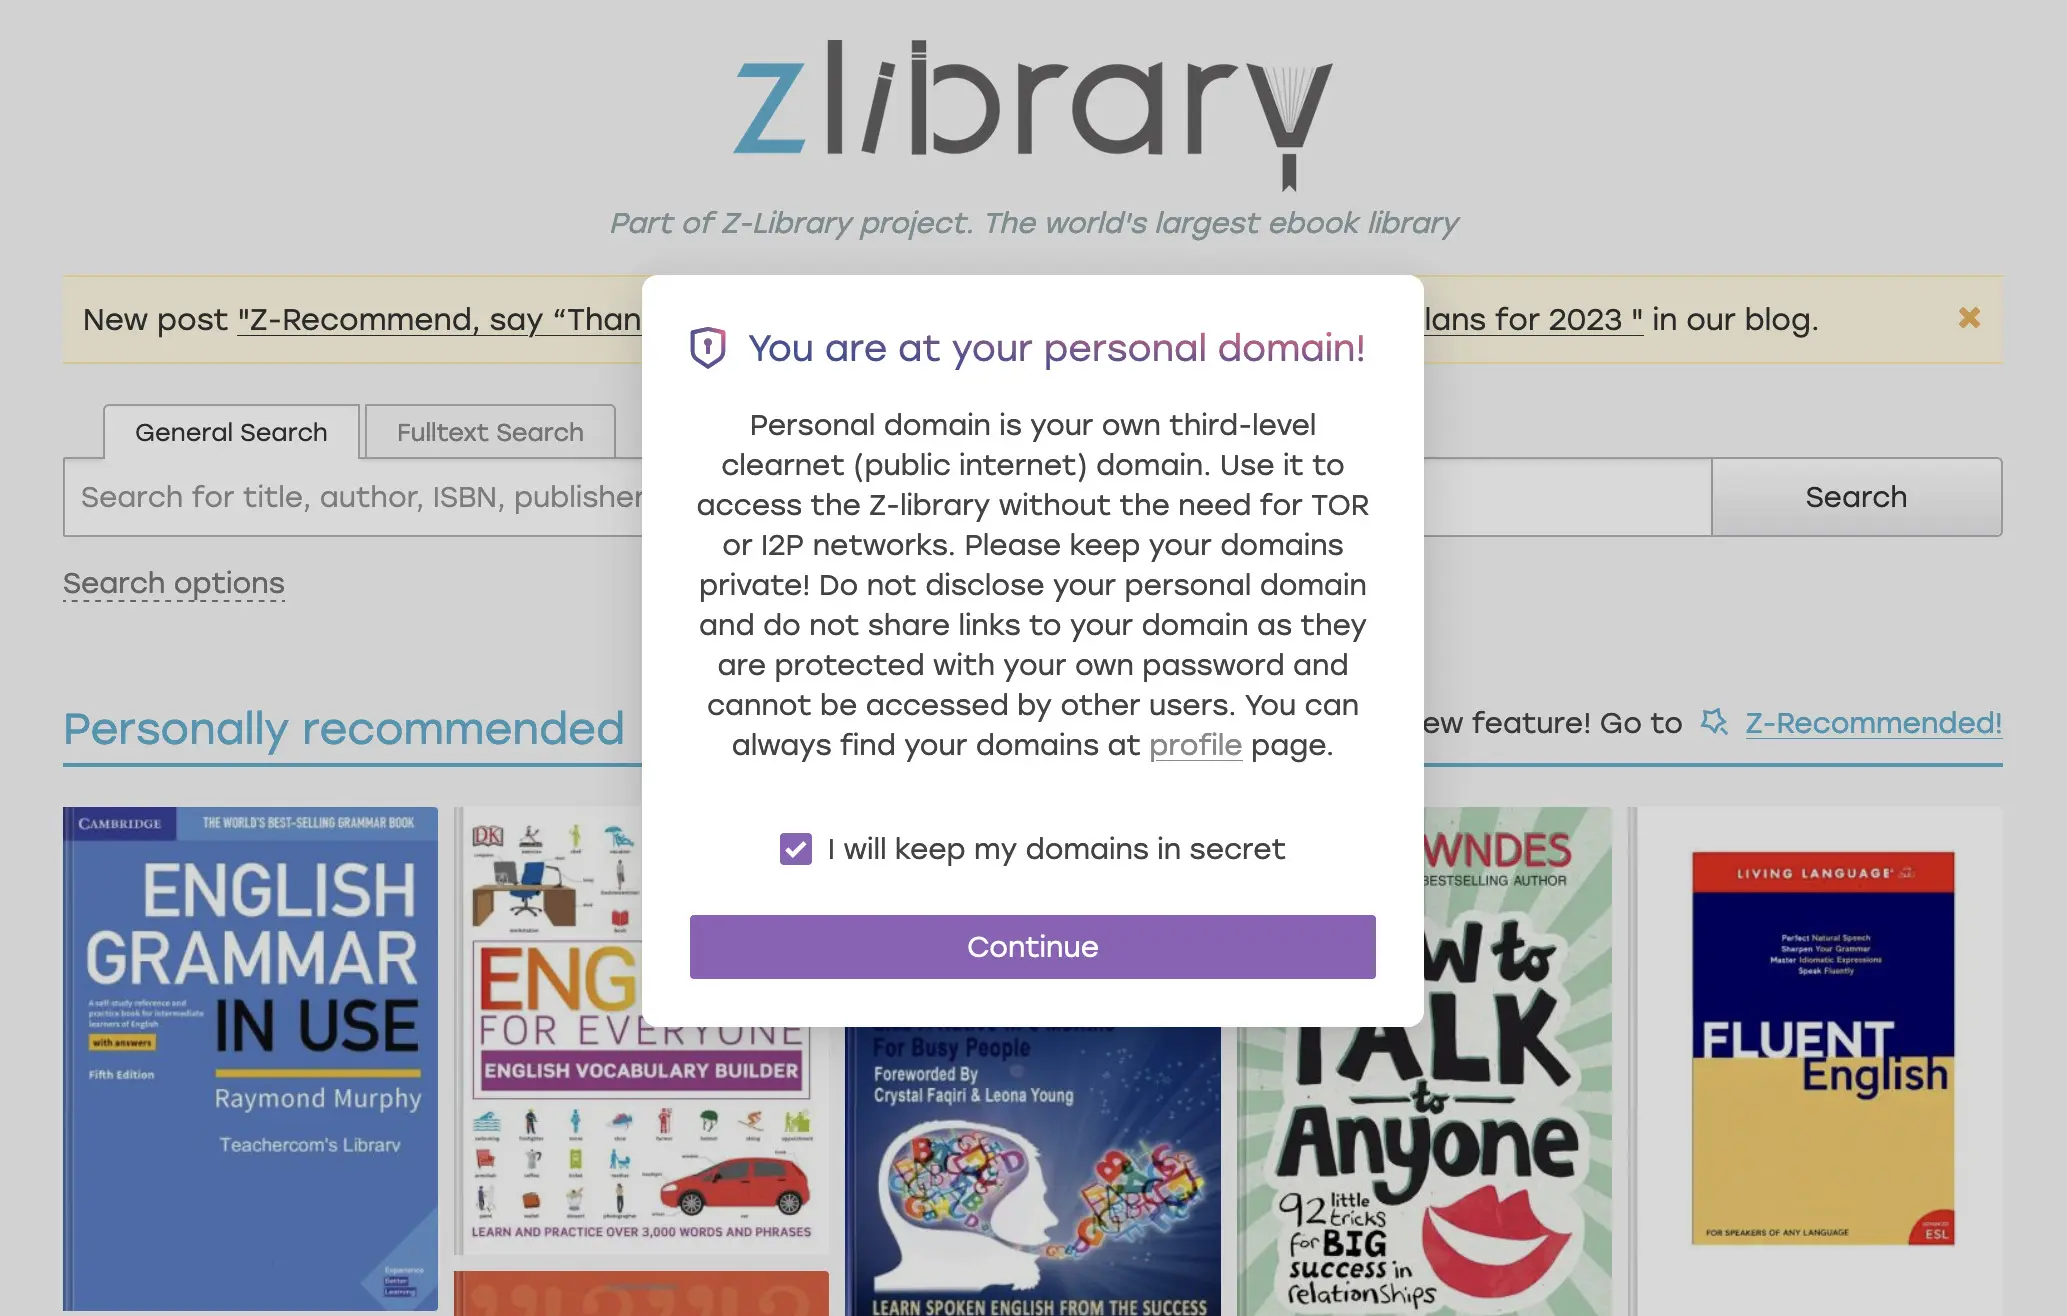 Is Z-Library real?